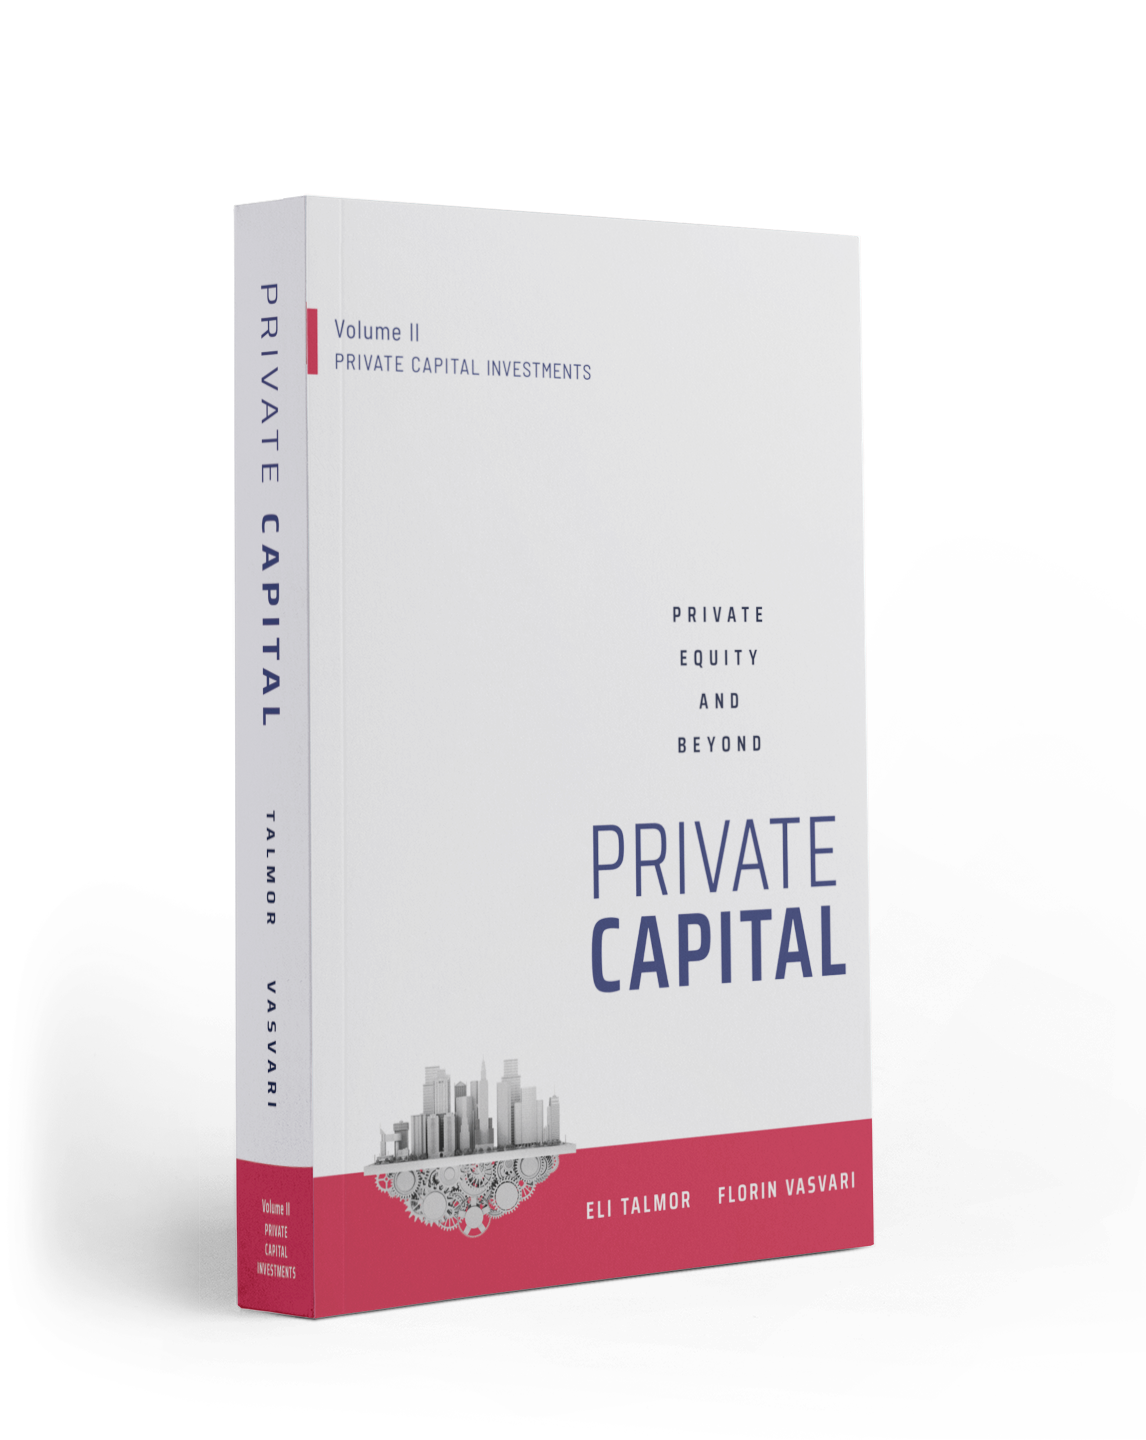 Private equity and beyond - Volume II: Private Capital Investments